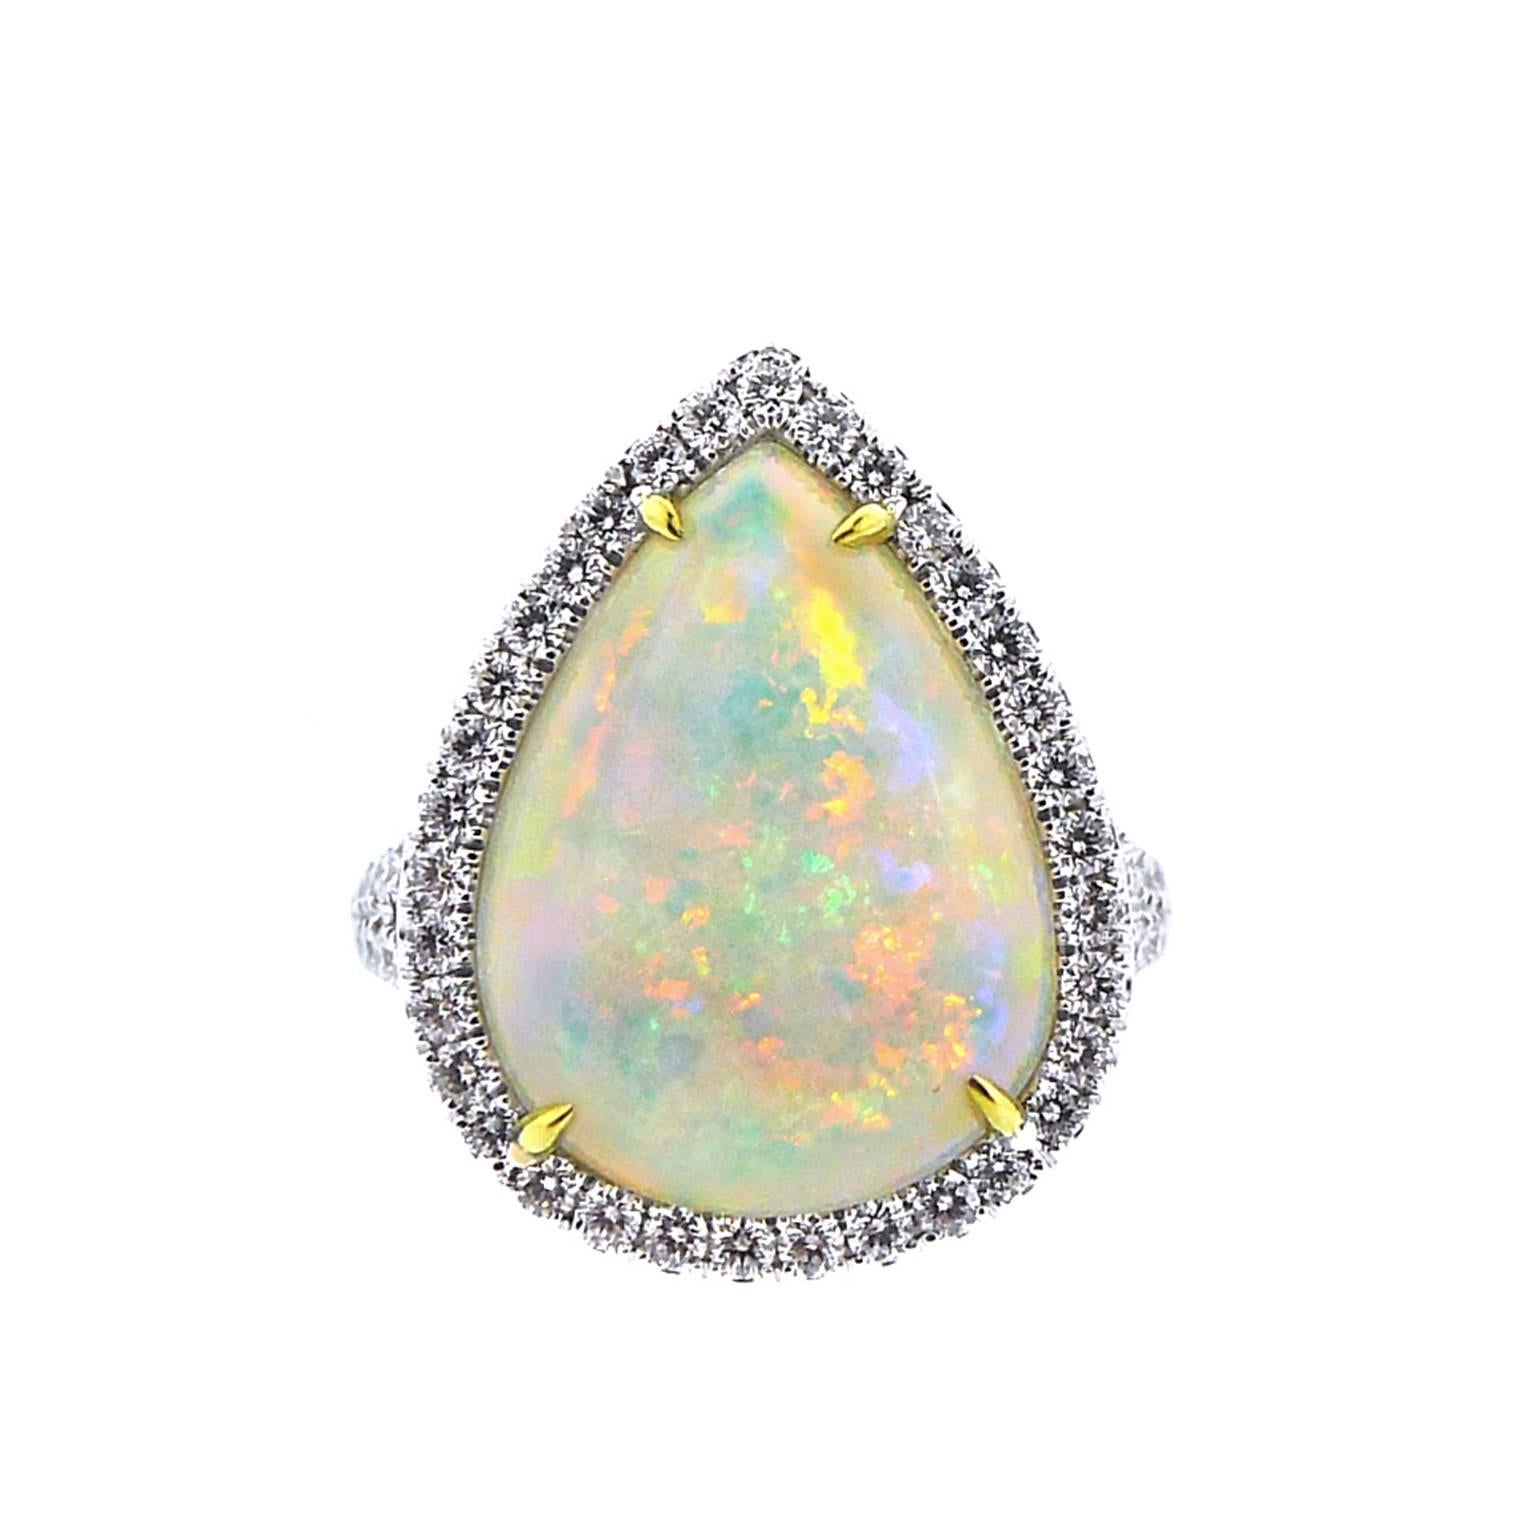 Center is a pear shaped opal weighing 4.52 carats and measuring 17 millimeters by 12.13 millimeters. The play of color is moderately strong with predominant reds and oranges and secondary blues and greens. The prongs are handmade 18 karat green